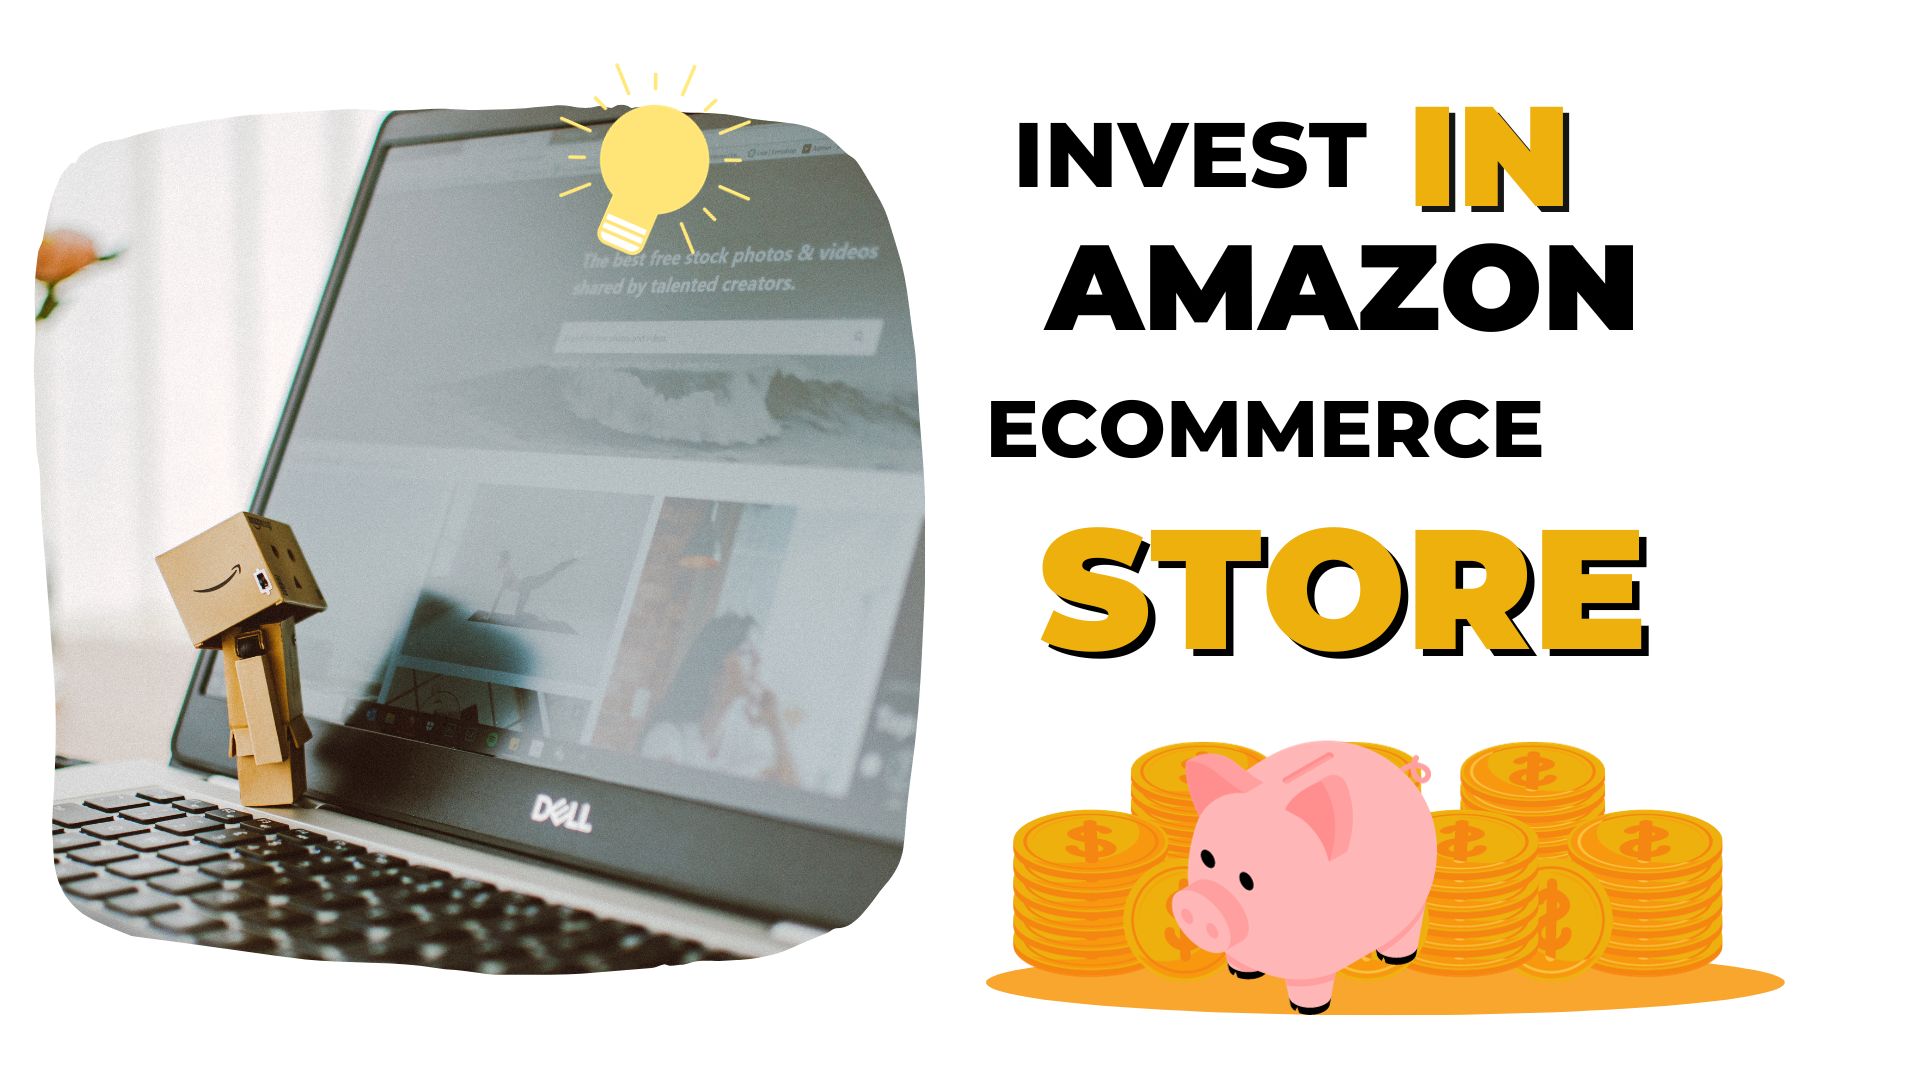 Invest in Amazon Ecommerce Store